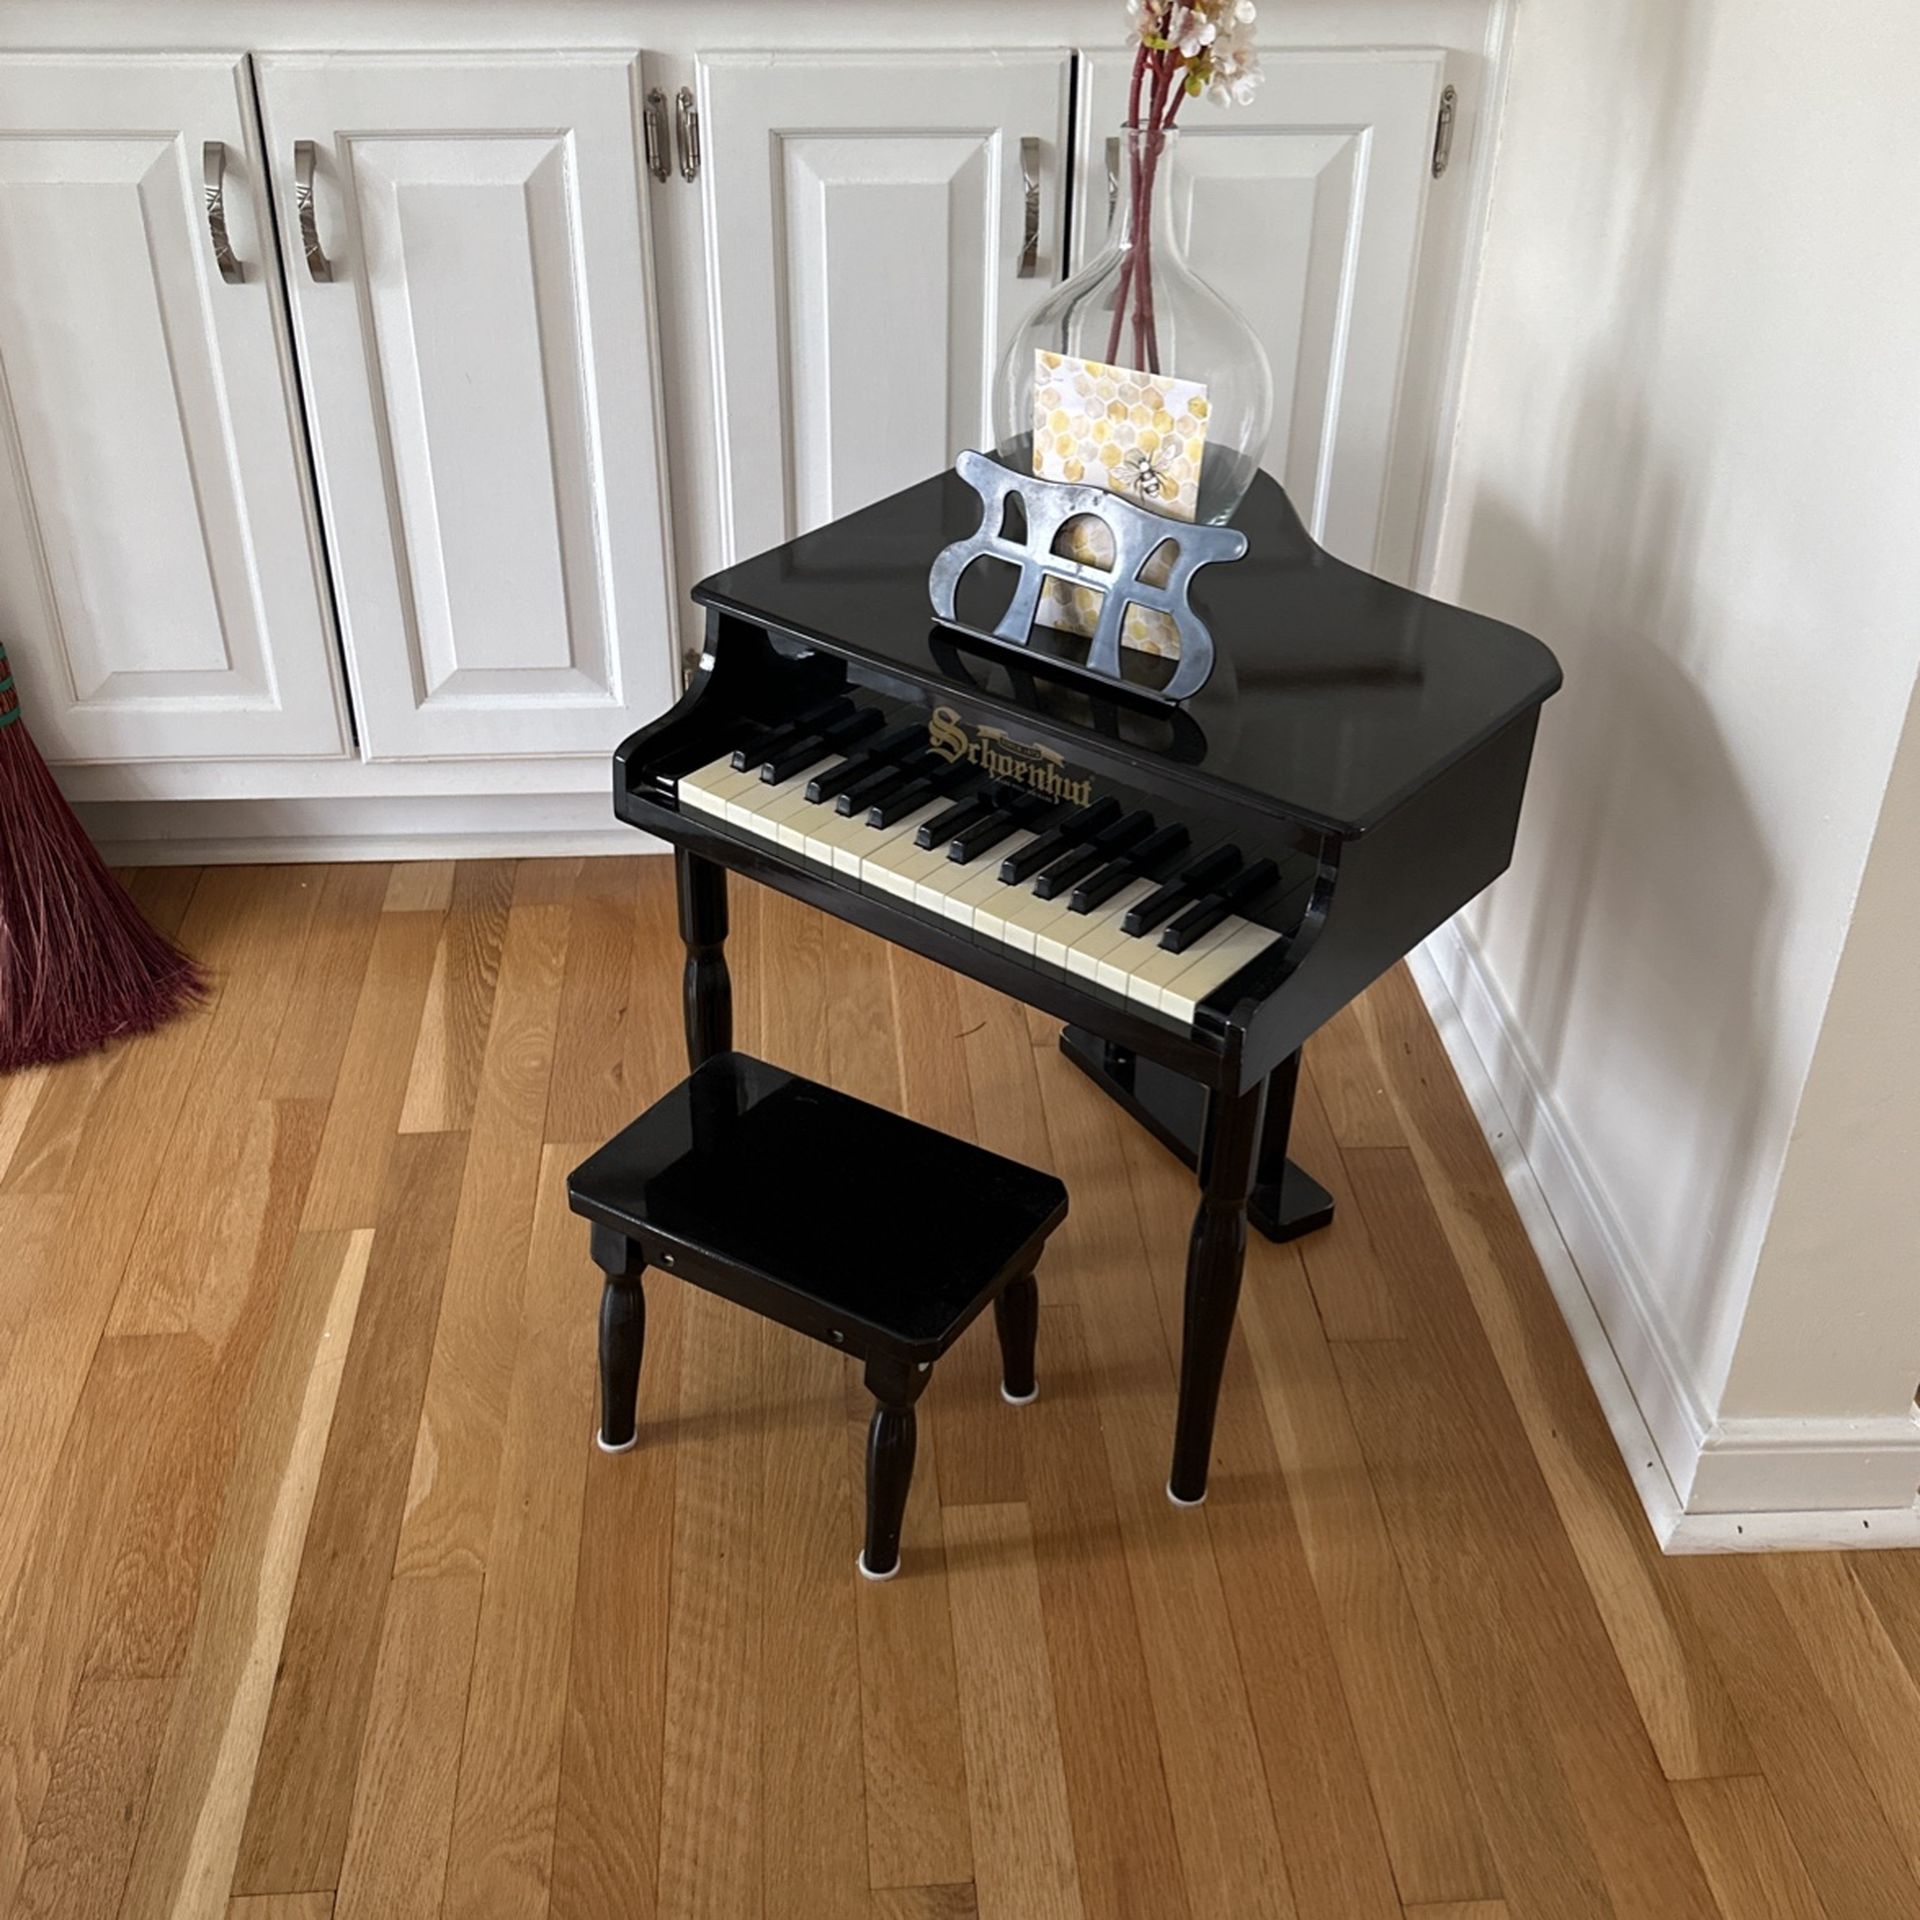 Baby Grand Piano For A Child